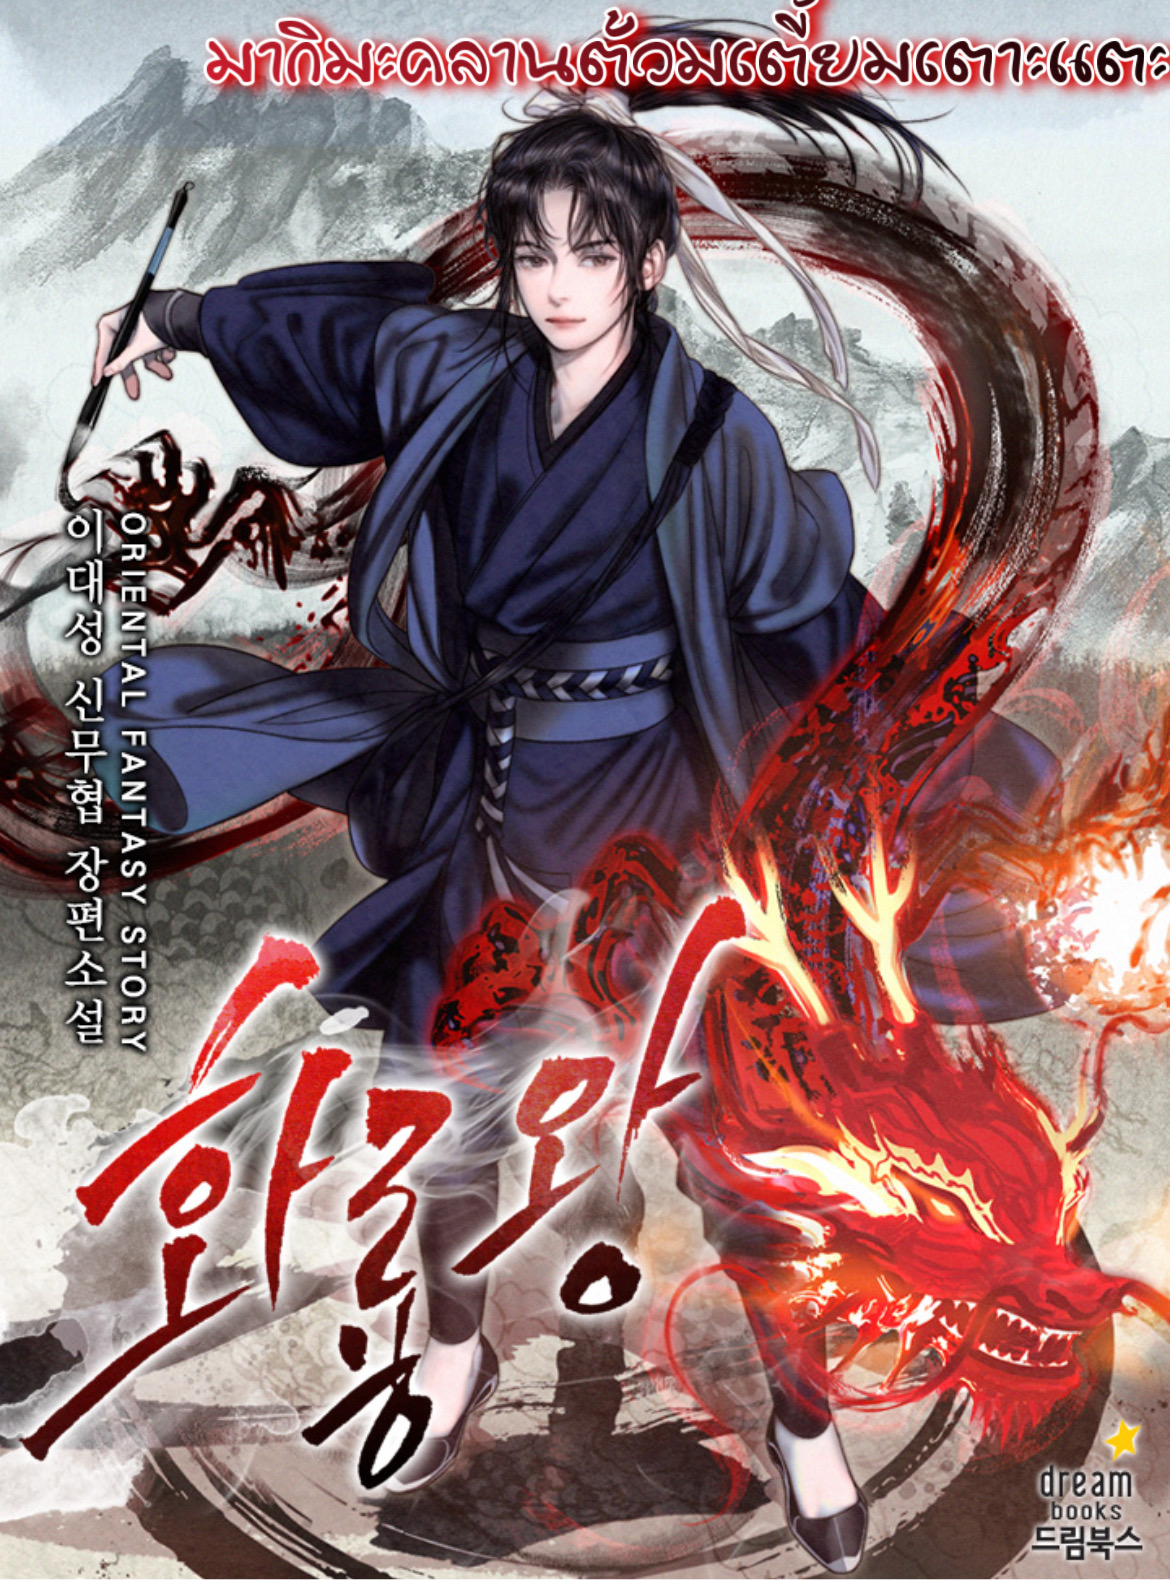 King of Fire Dragon 30 09